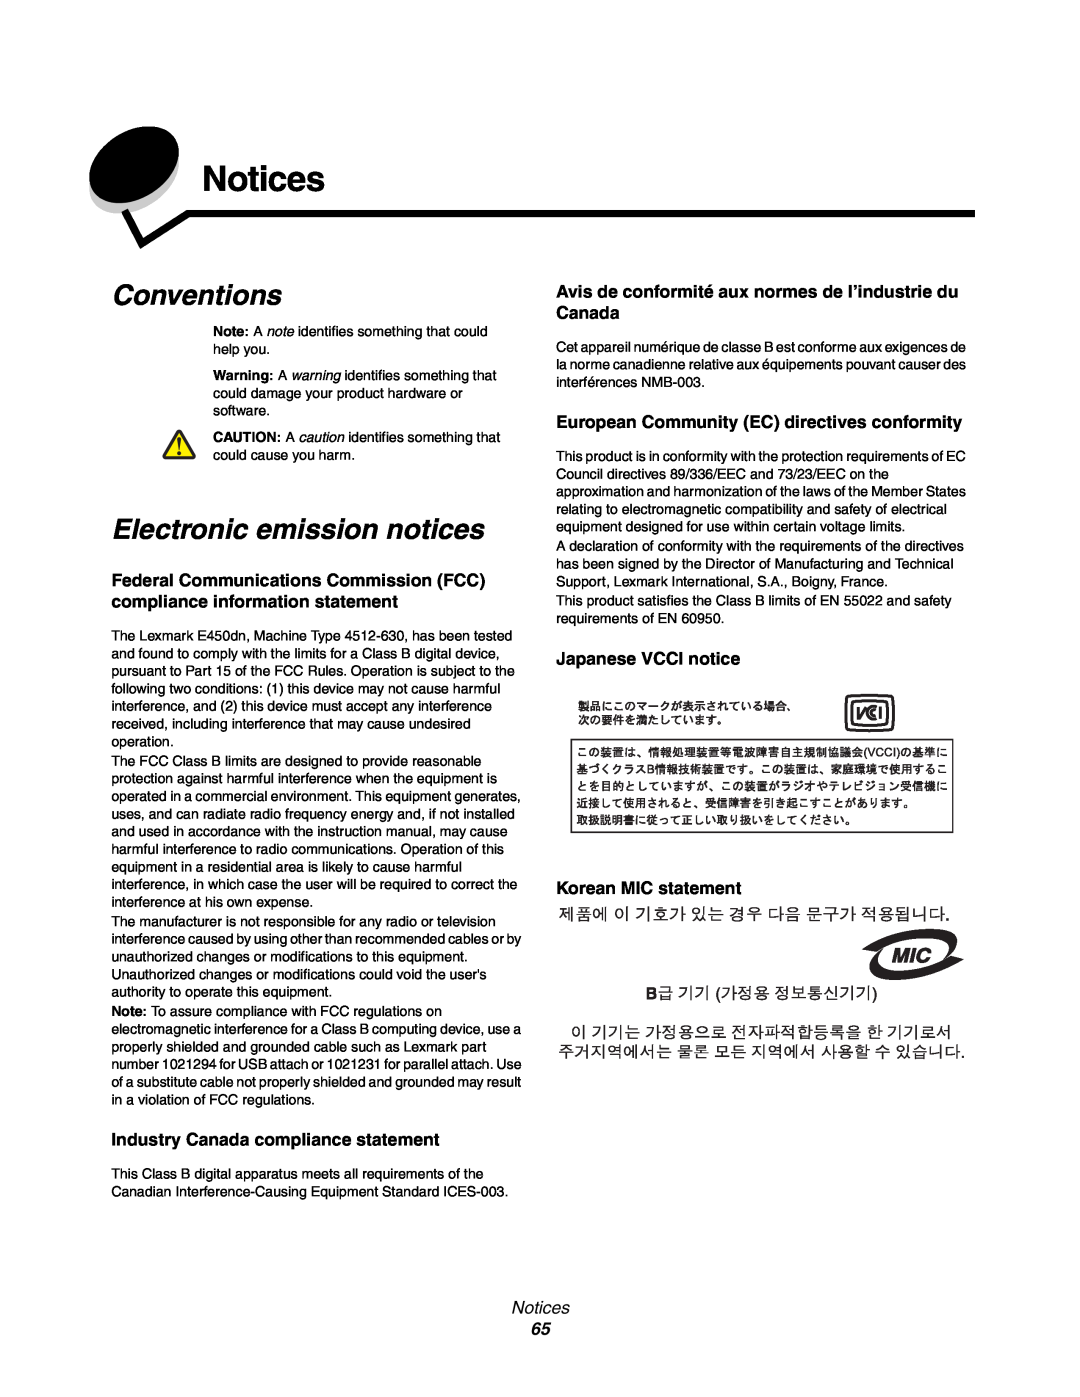 Lexmark 450dn manual Notices, Conventions, Electronic emission notices, Industry Canada compliance statement 